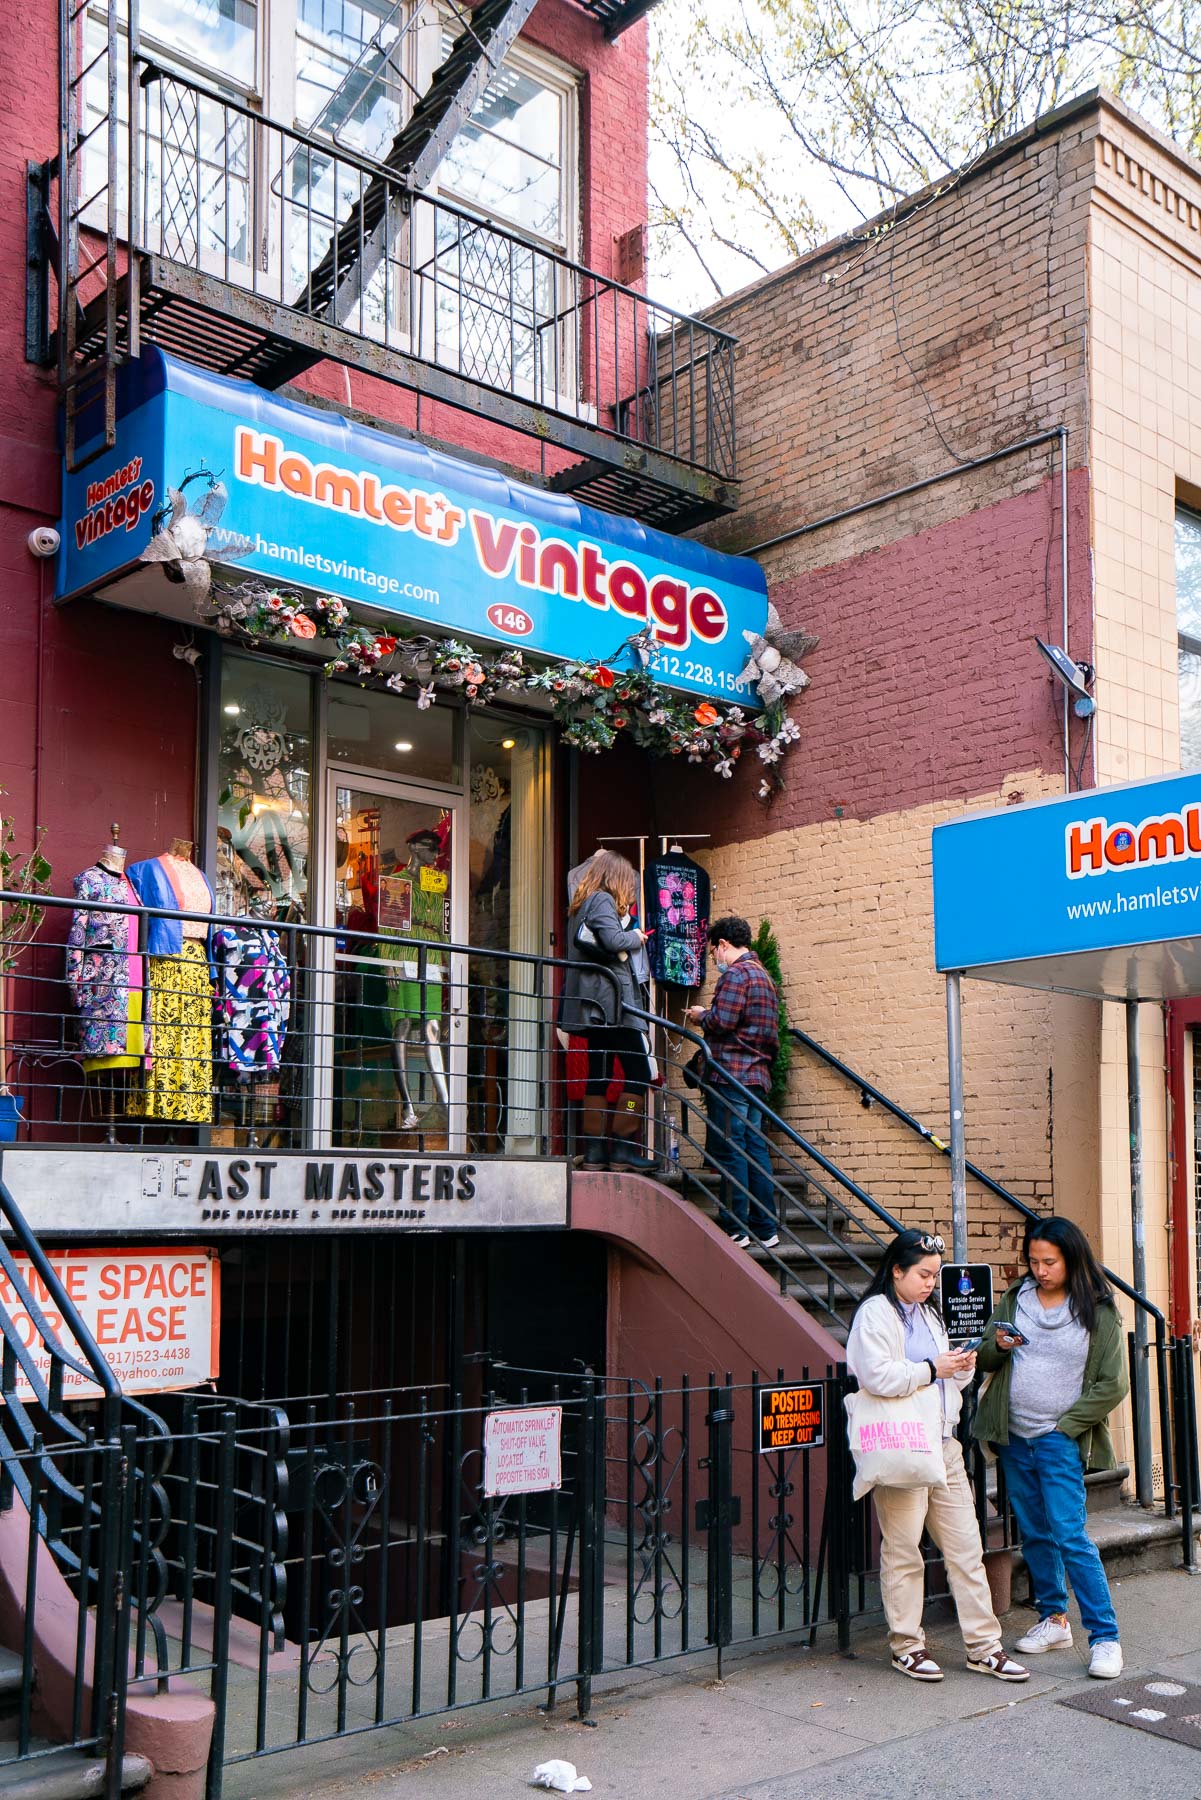 People waiting for Hamlet's Vintage to open in the West Village